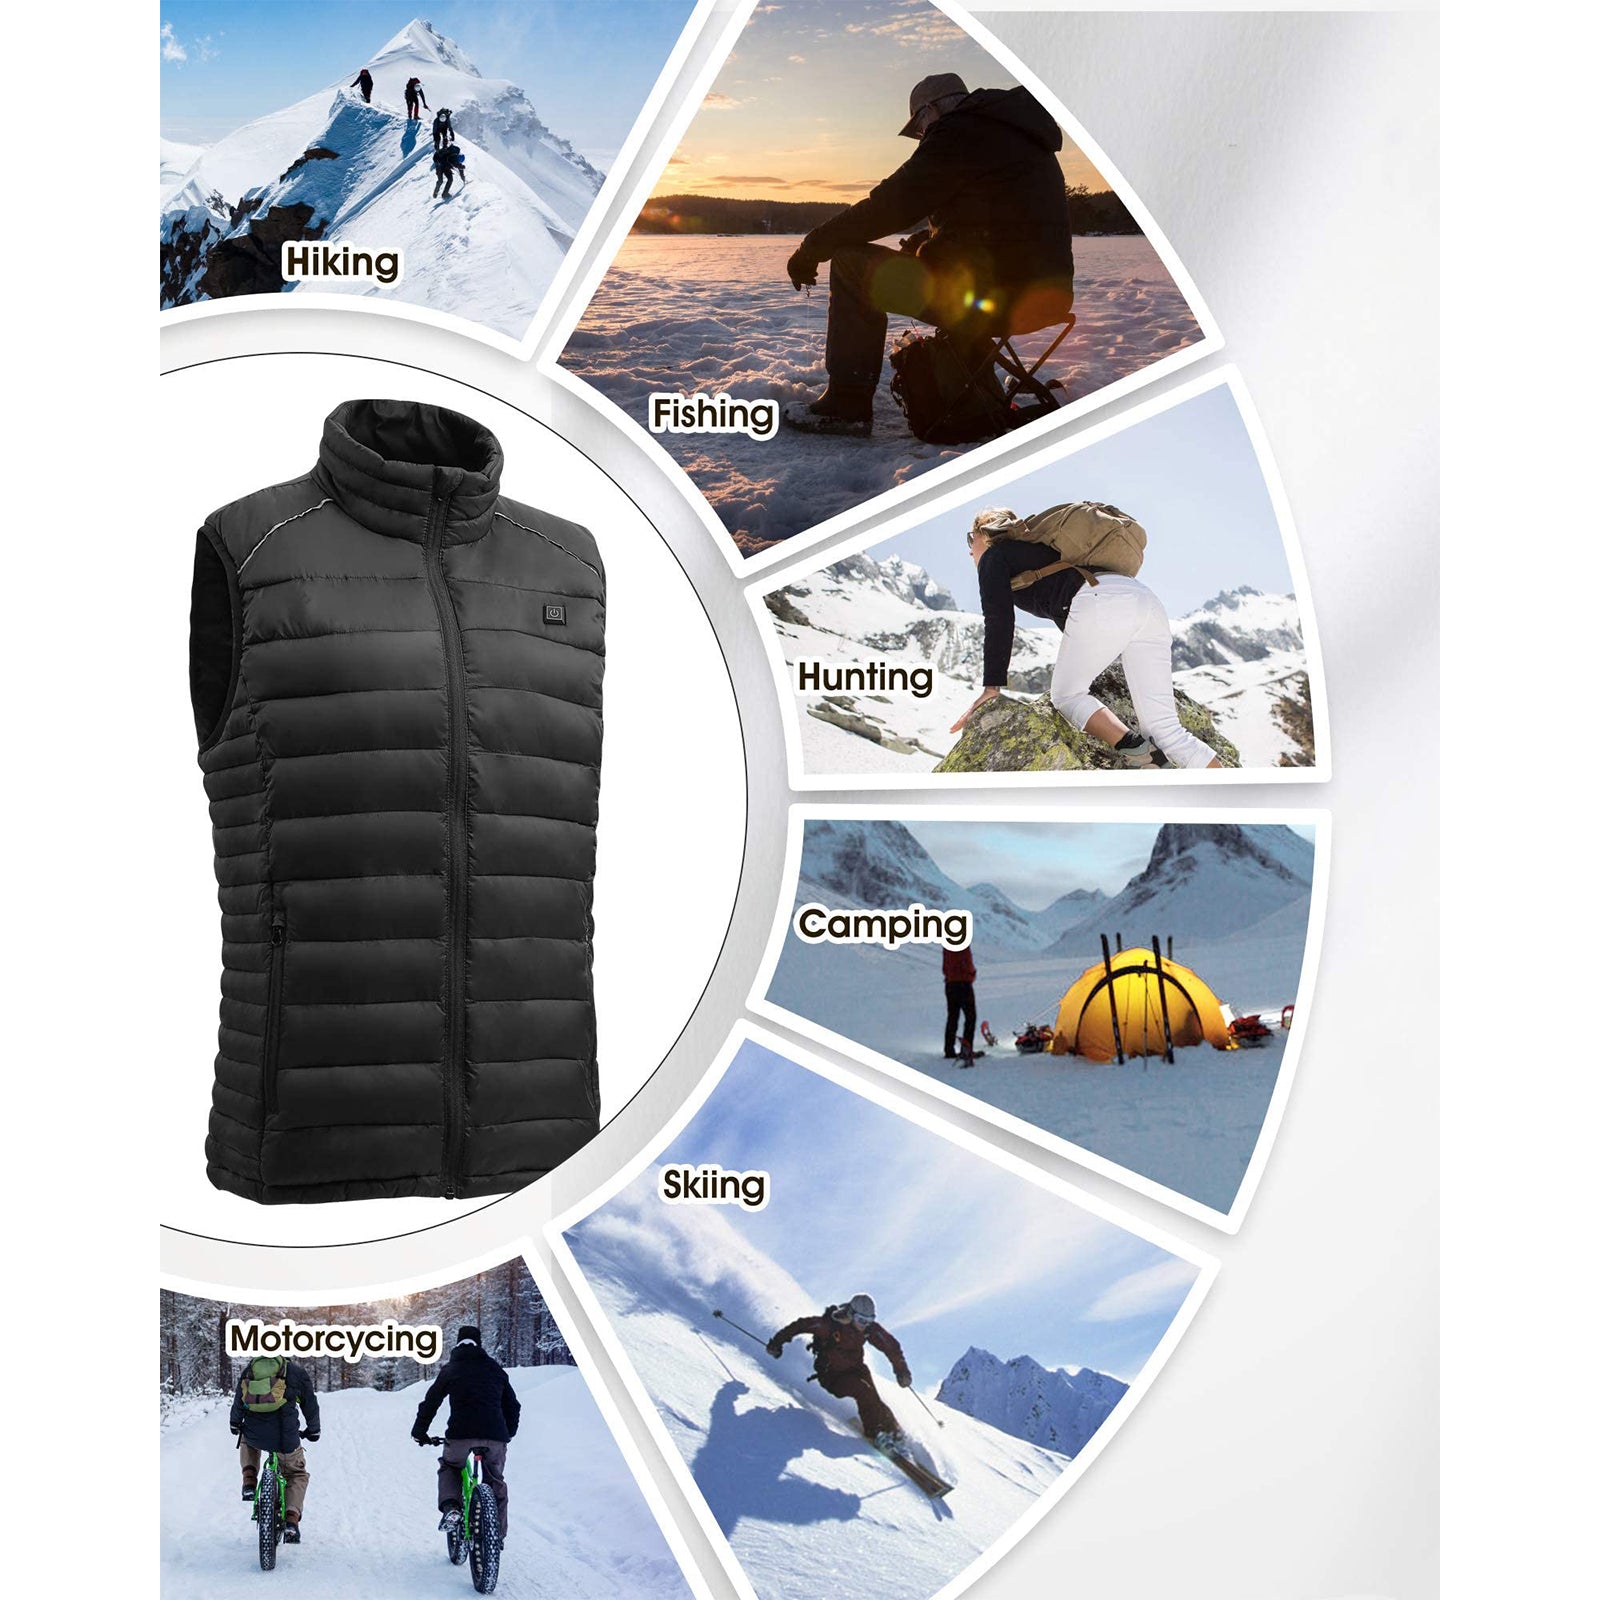 Cotonie Heated Vest for Men & Women Outdoor Warm Clothing Heated for Riding  Skiing Fishing Heated for Winter (No Battery Pack)